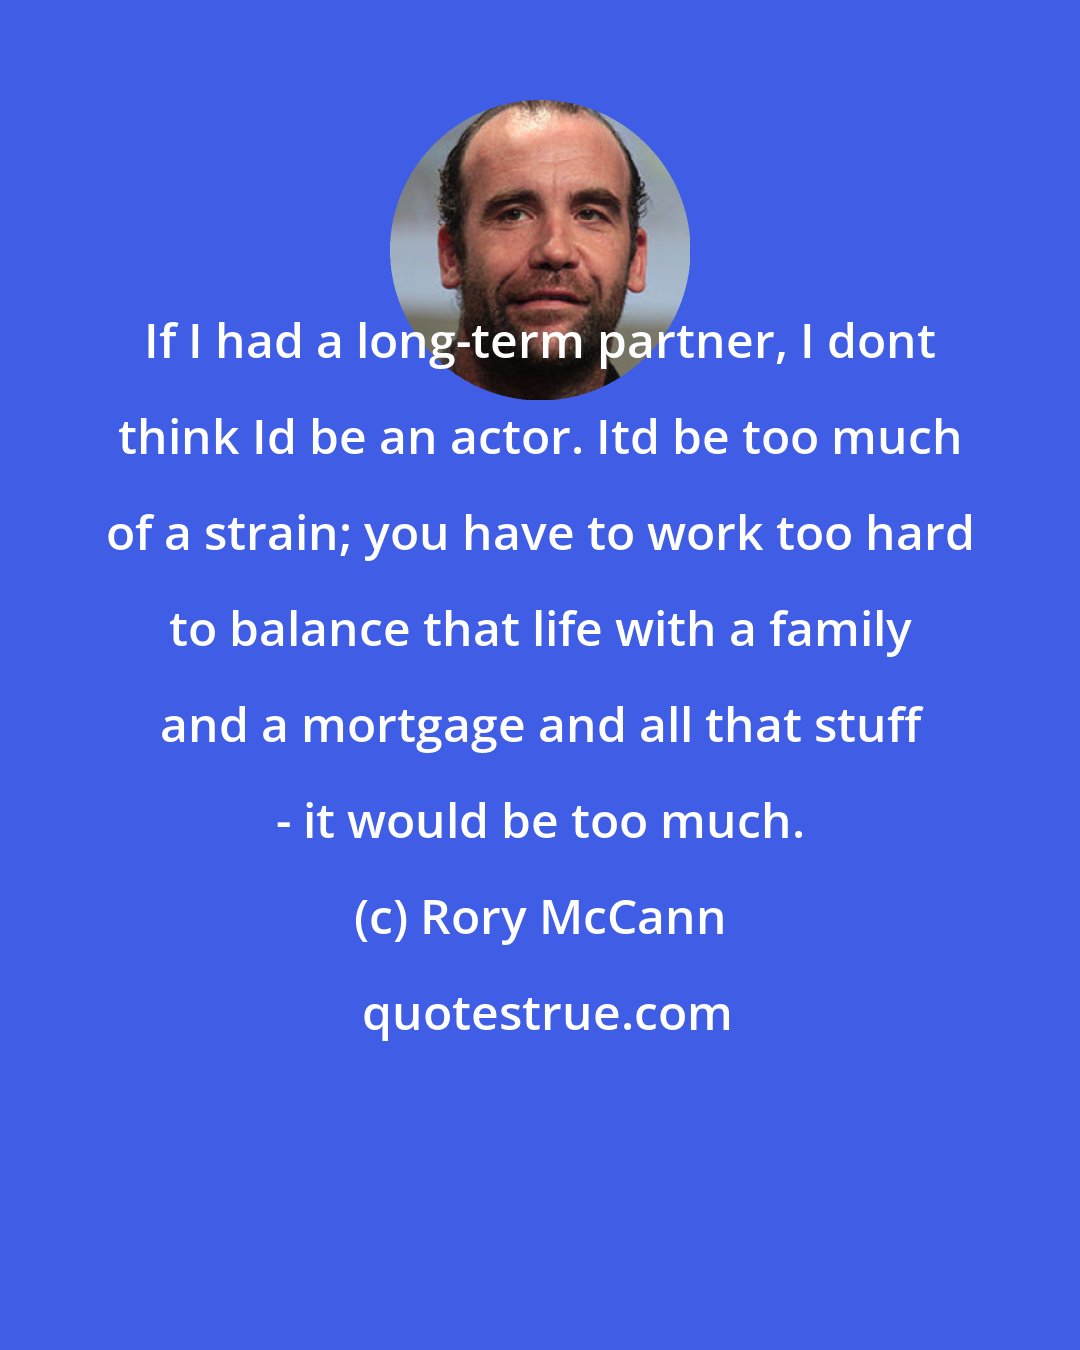 Rory McCann: If I had a long-term partner, I dont think Id be an actor. Itd be too much of a strain; you have to work too hard to balance that life with a family and a mortgage and all that stuff - it would be too much.